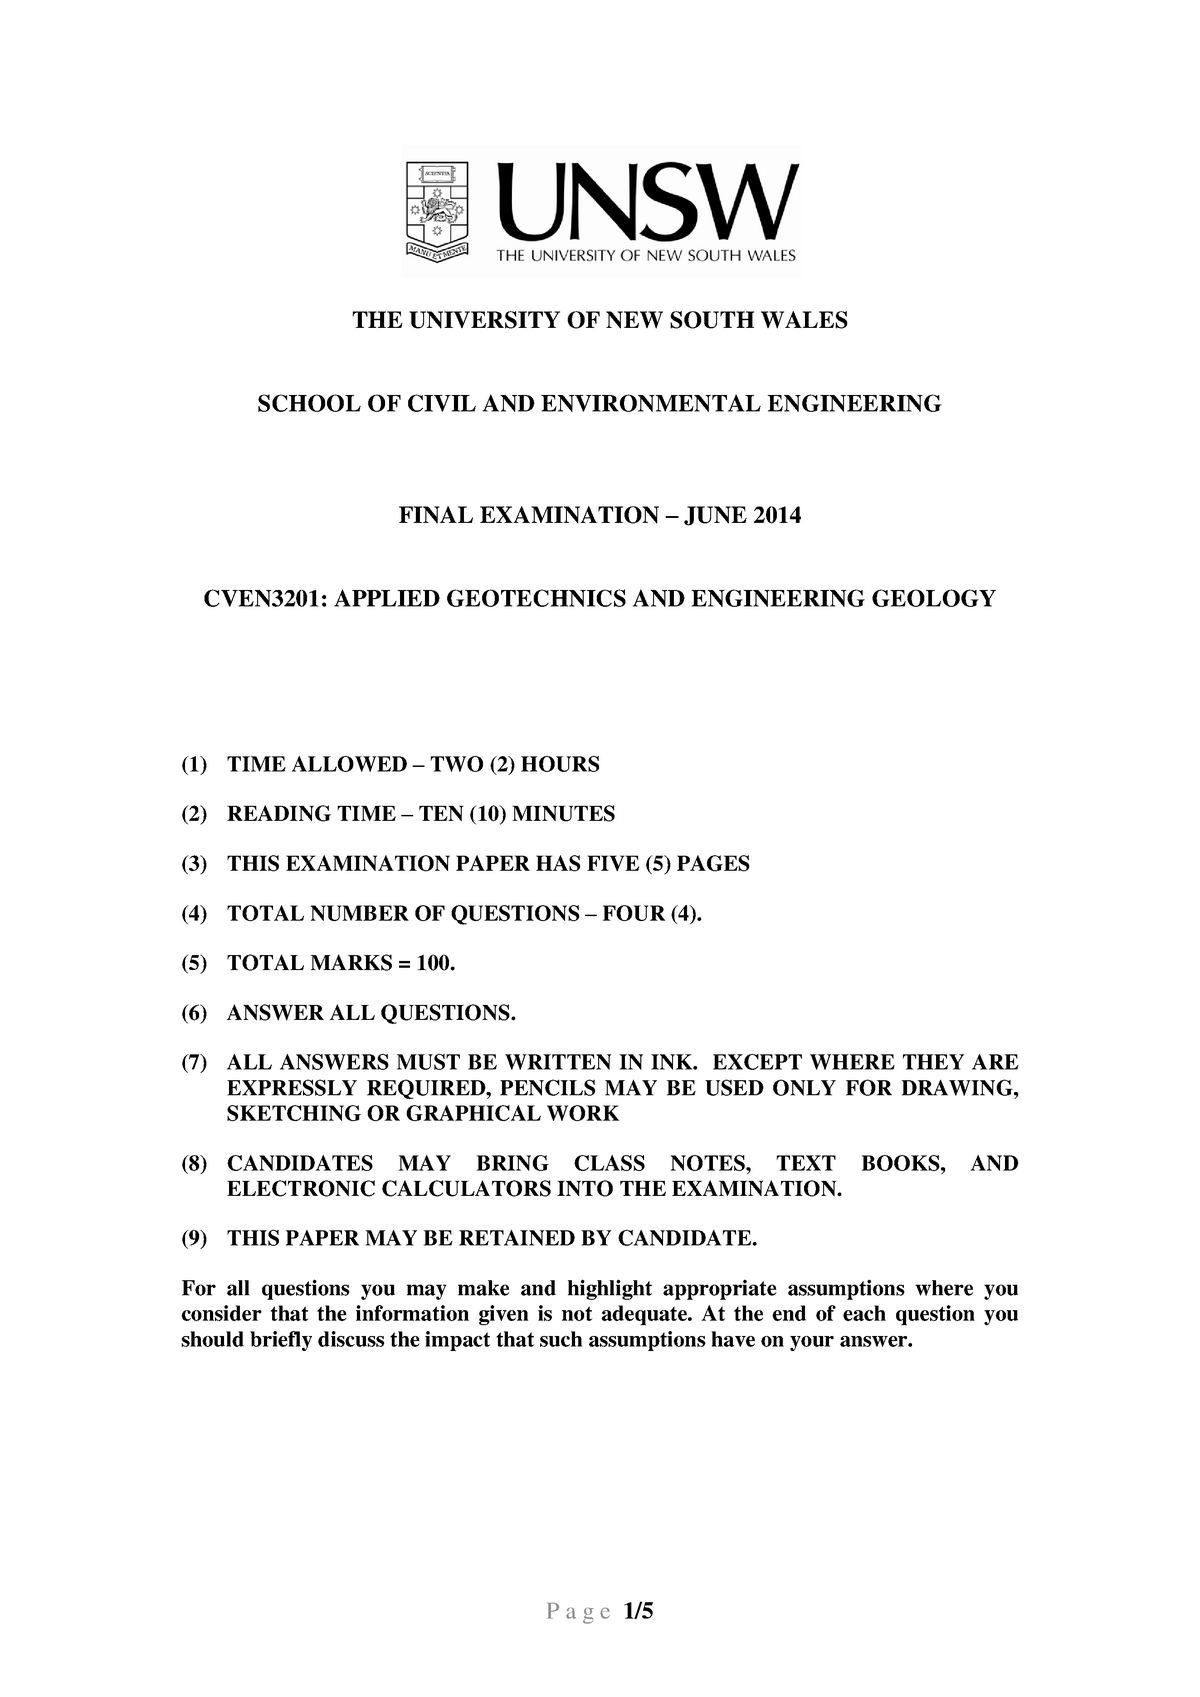 exam-2014-the-university-of-new-south-wales-school-of-civil-and